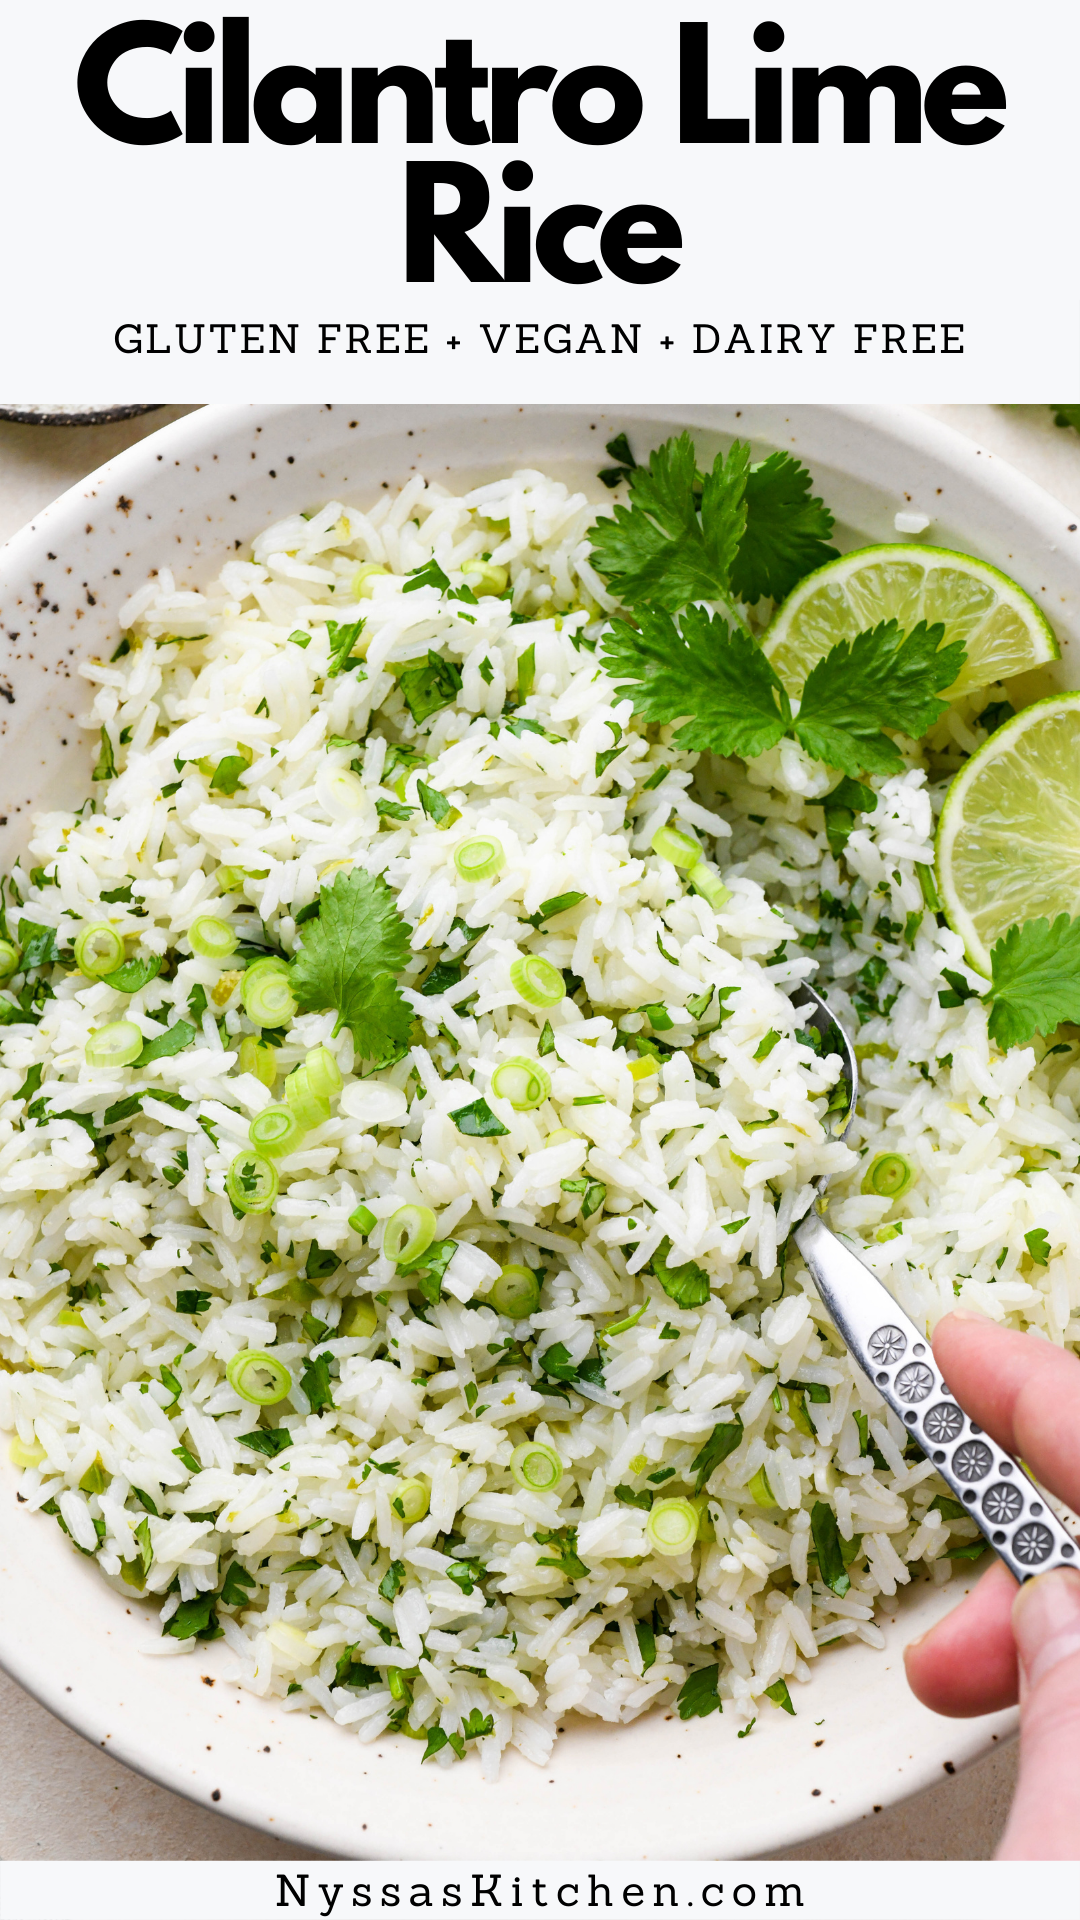 Cilantro lime rice is the perfect simple side dish for any Mexican inspired dinner! Made with just a handful of simple ingredients and absolutely loaded with zesty flavor. Easy to make and so delicious! Gluten free, dairy free, vegan, and vegetarian.